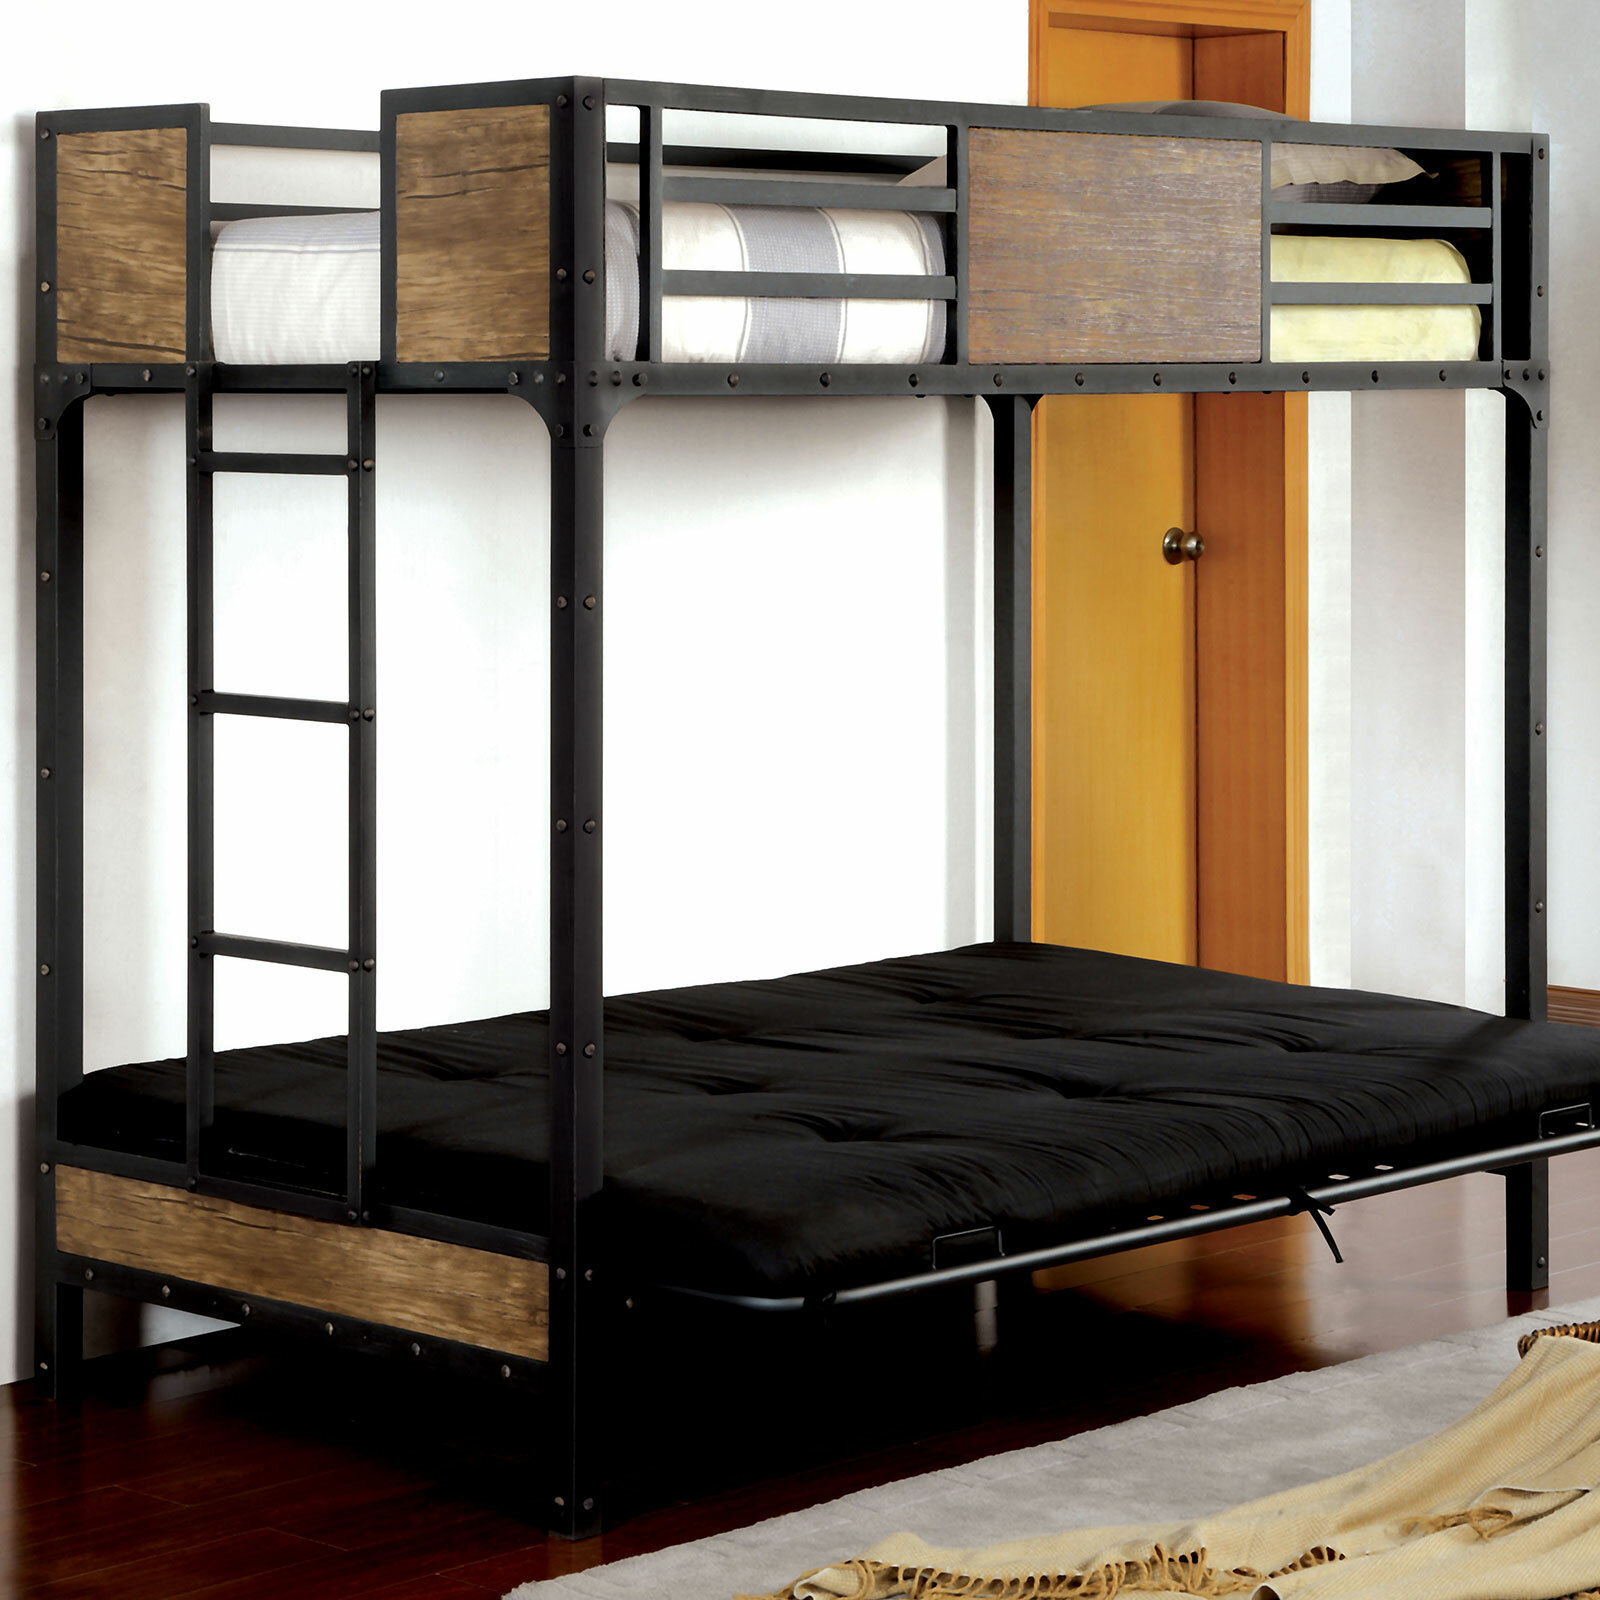 Full Over Futon Bunk Bed Visualhunt, Wood Bunk Bed With Futon Couch